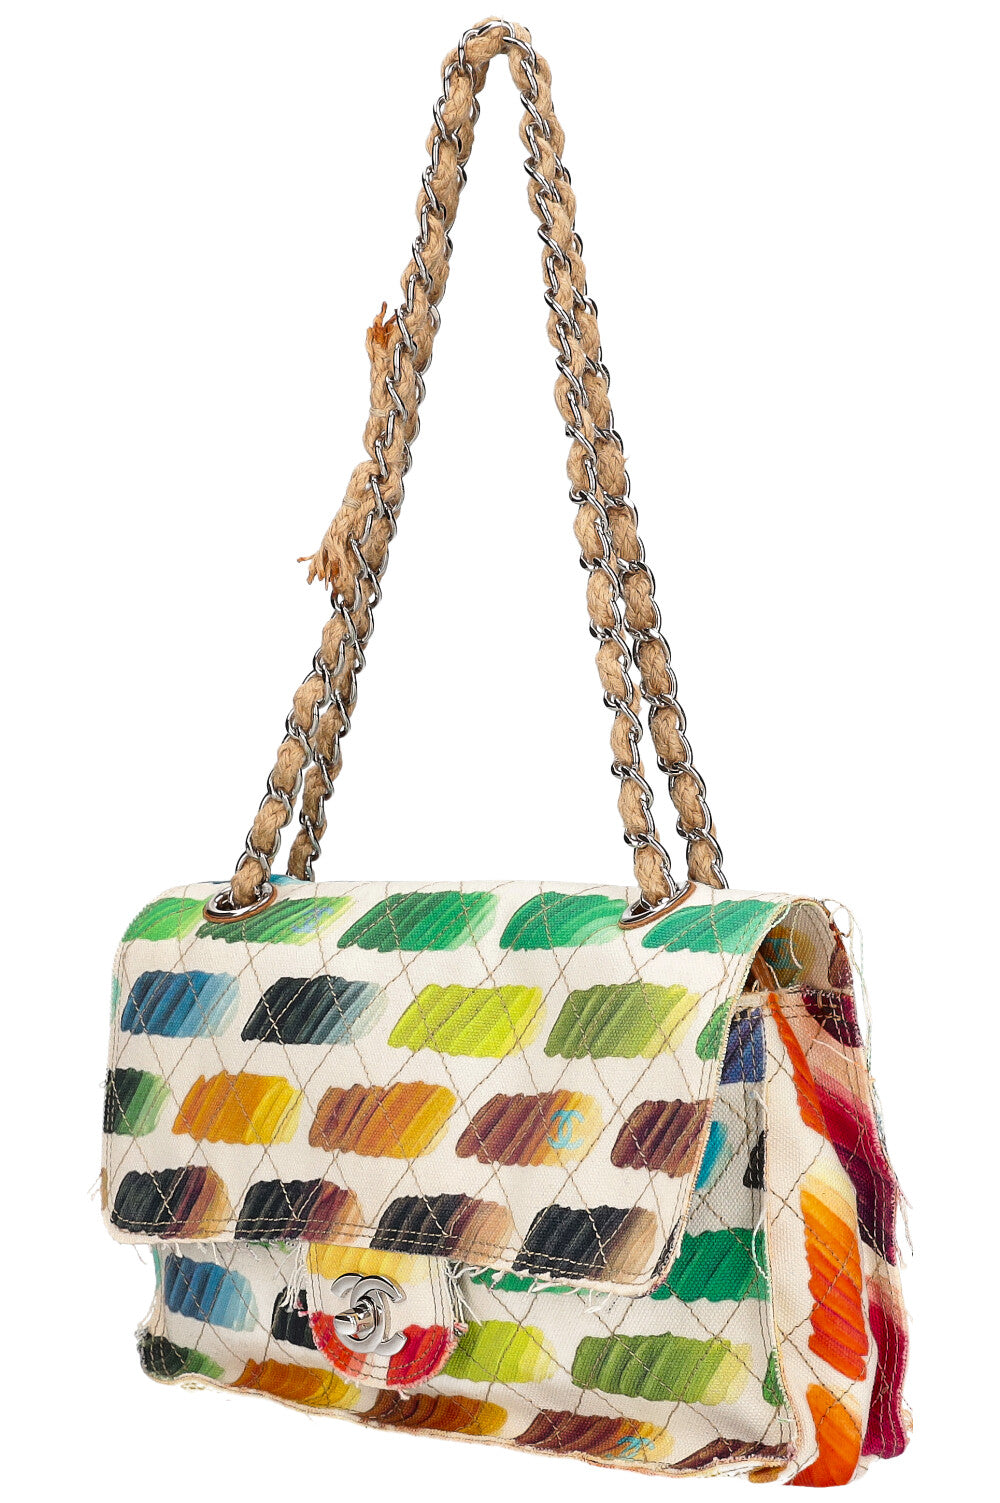 CHANEL Colorama Flap Bag Quilted Watercolor Canvas